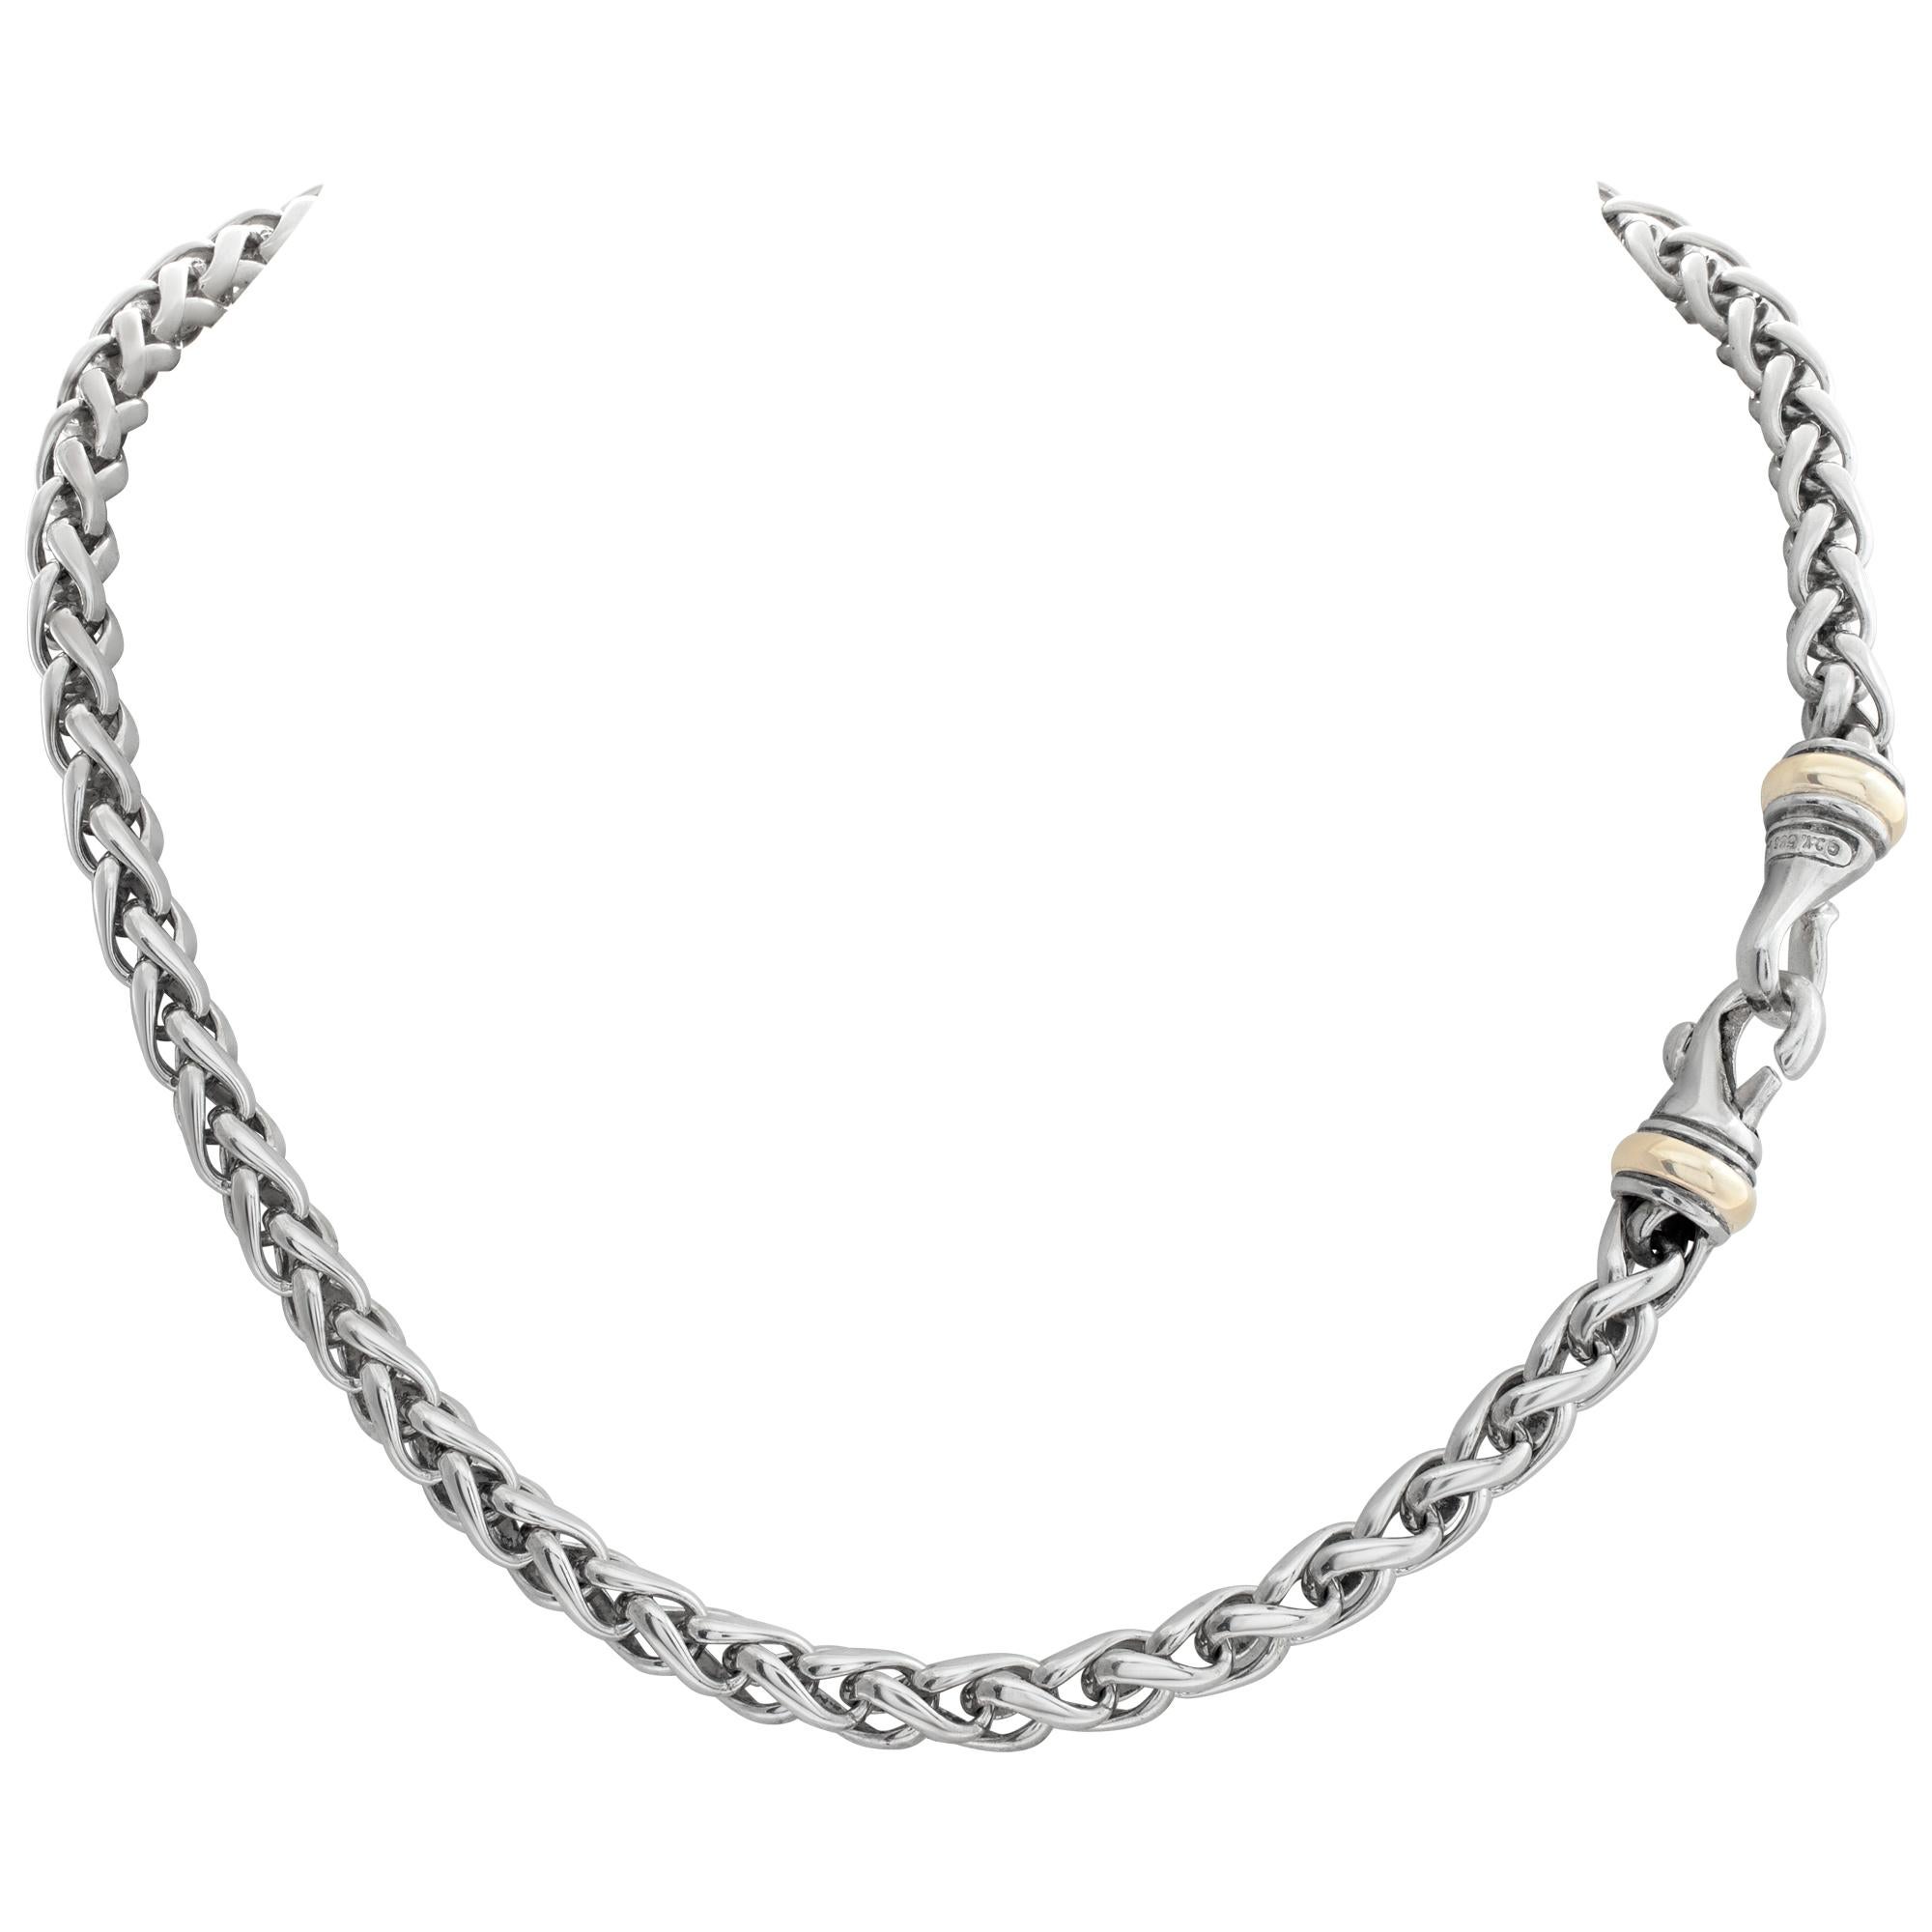 David Yurman wheat chain necklace in 14k gold and sterling silver. Width 6mm. Length 16 inches. With DY pouch.